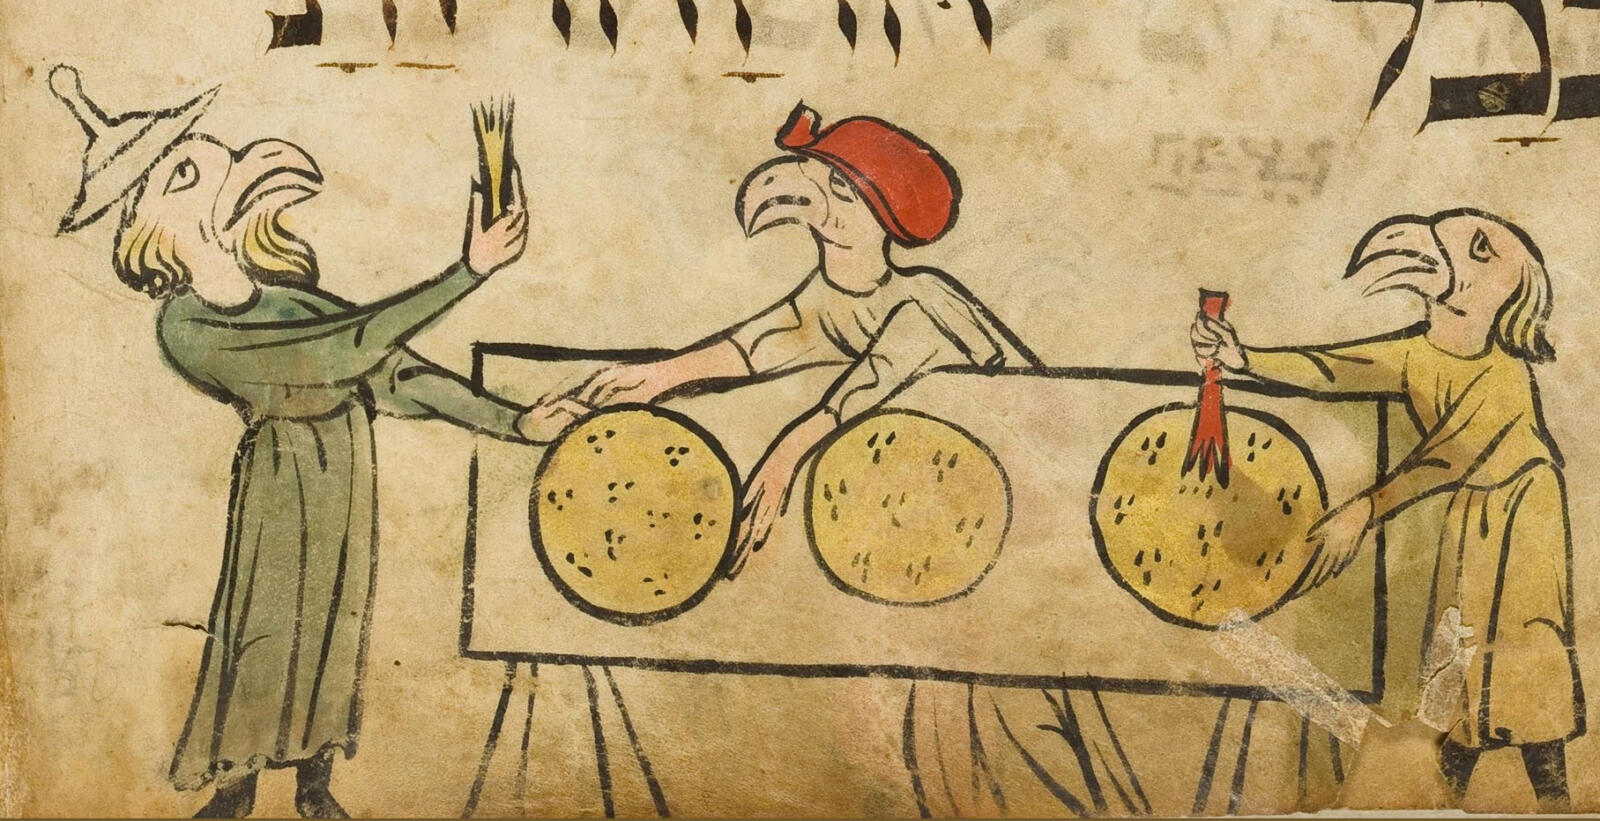 Medieval manuscript illustration showing people with birds' heads making matzah. One wears a distinctive looking hat.